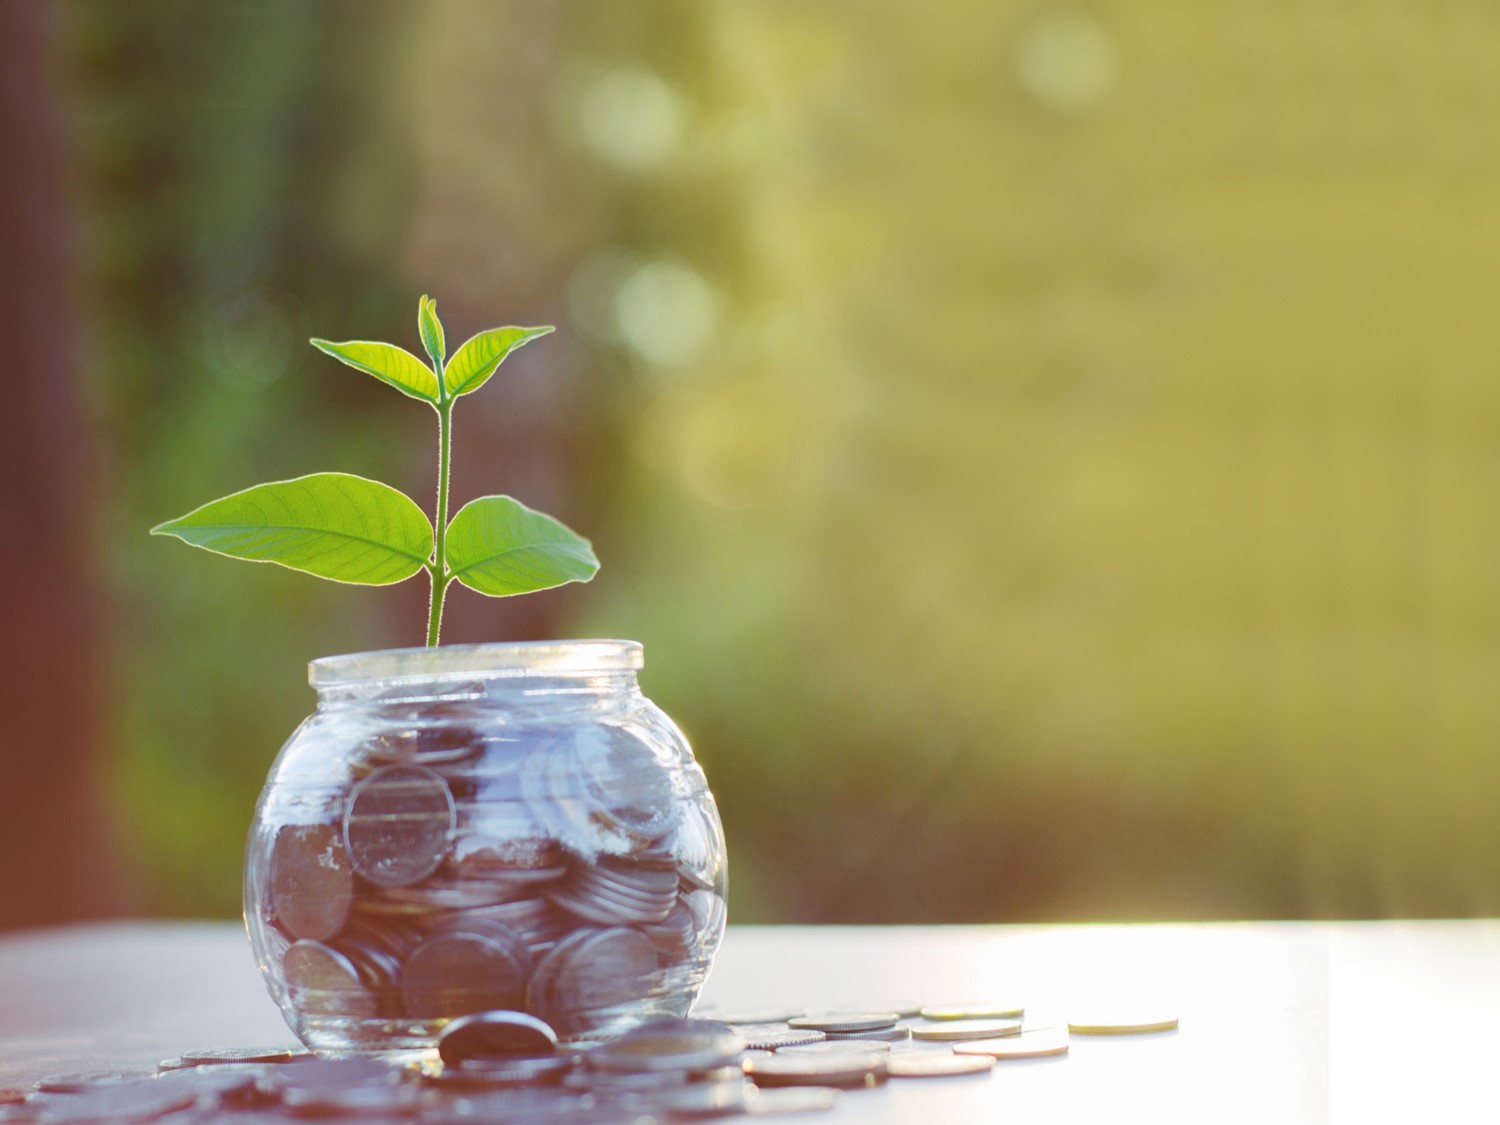 A jar of coins with a plant growing out of it, representing growing money.